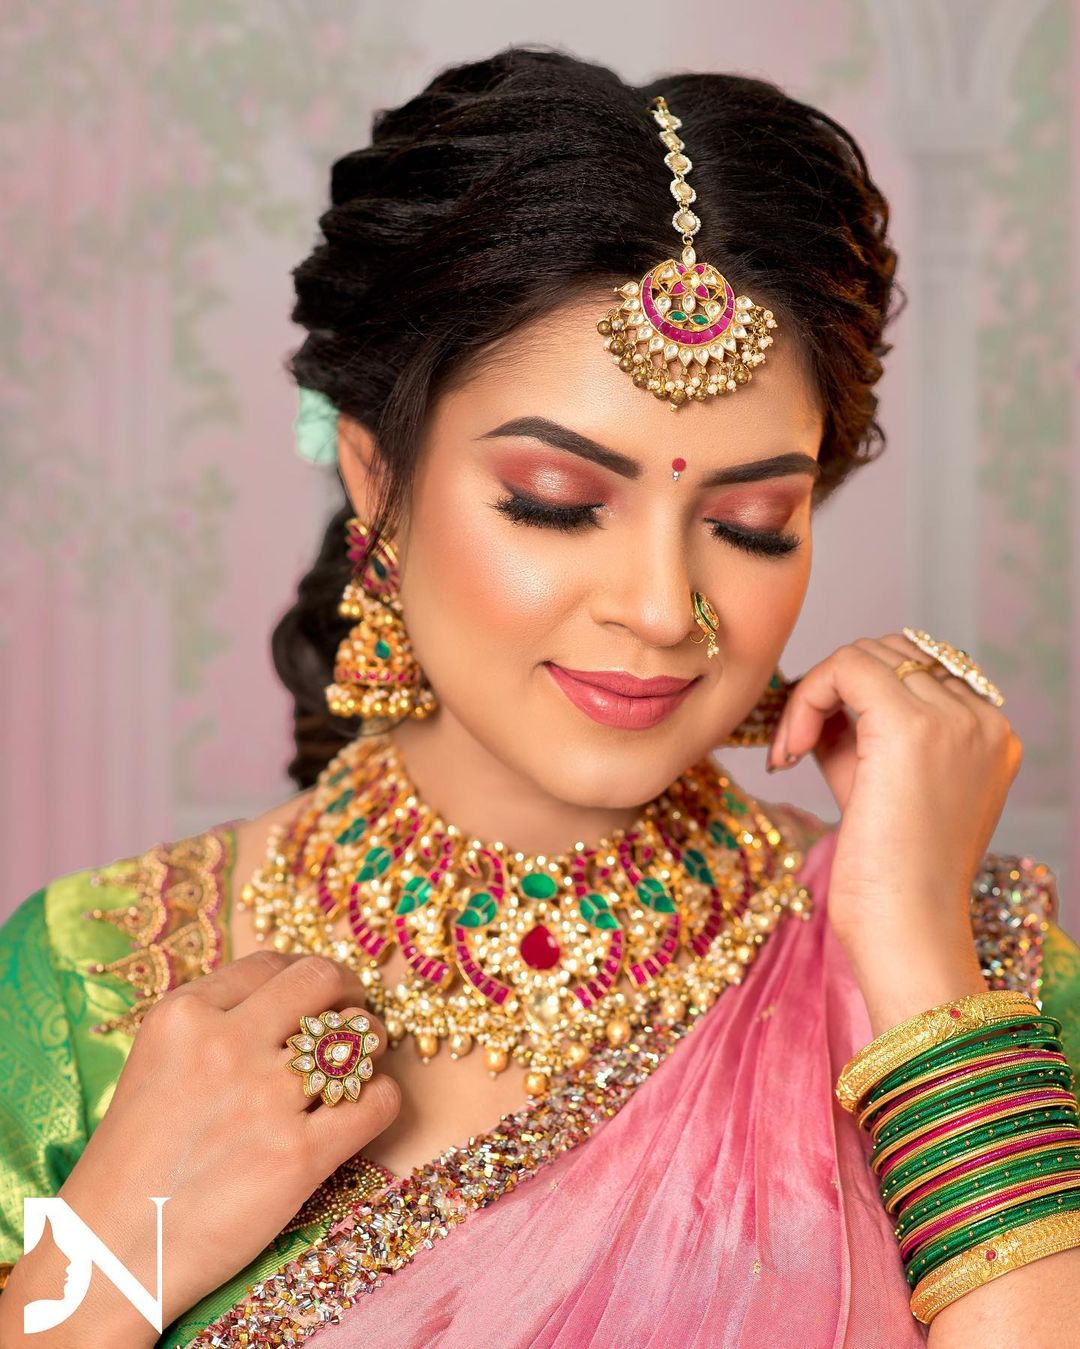 South Indian bridal makeup look with nude lips and soft eyes - wedding/engagement South Indian makeup look